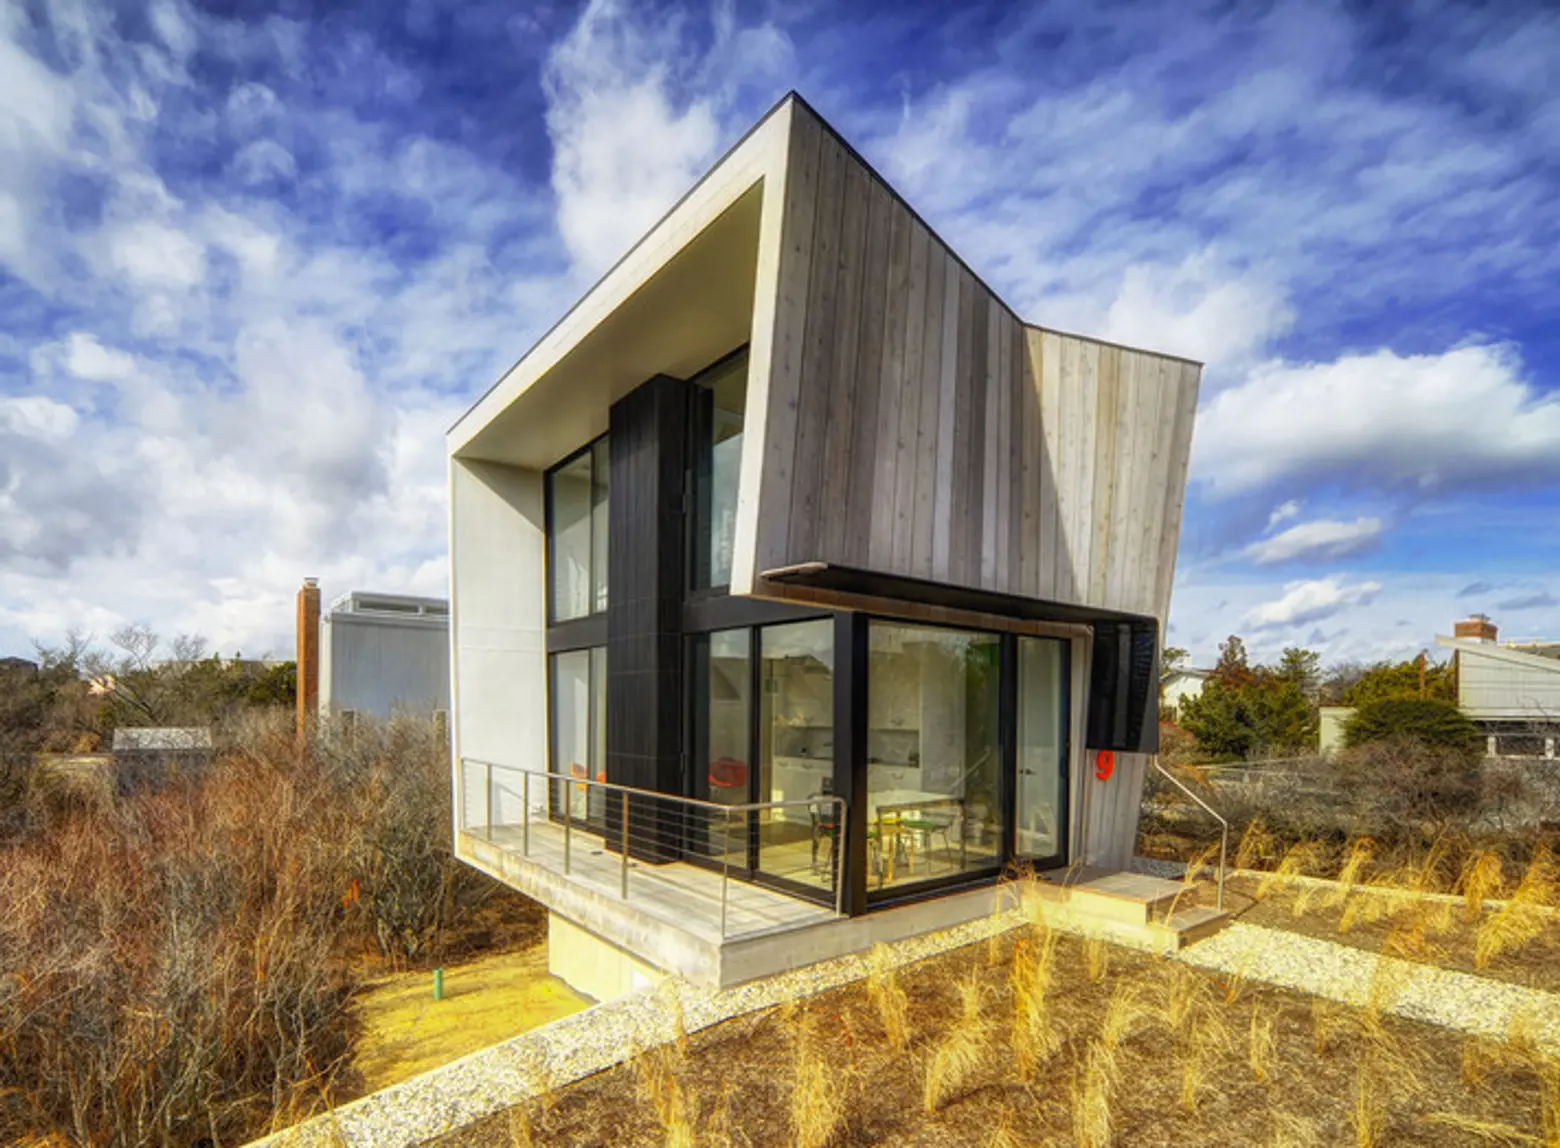 You Can Own This Energy-Efficient Beach House Designed by Bates Masi + Architects